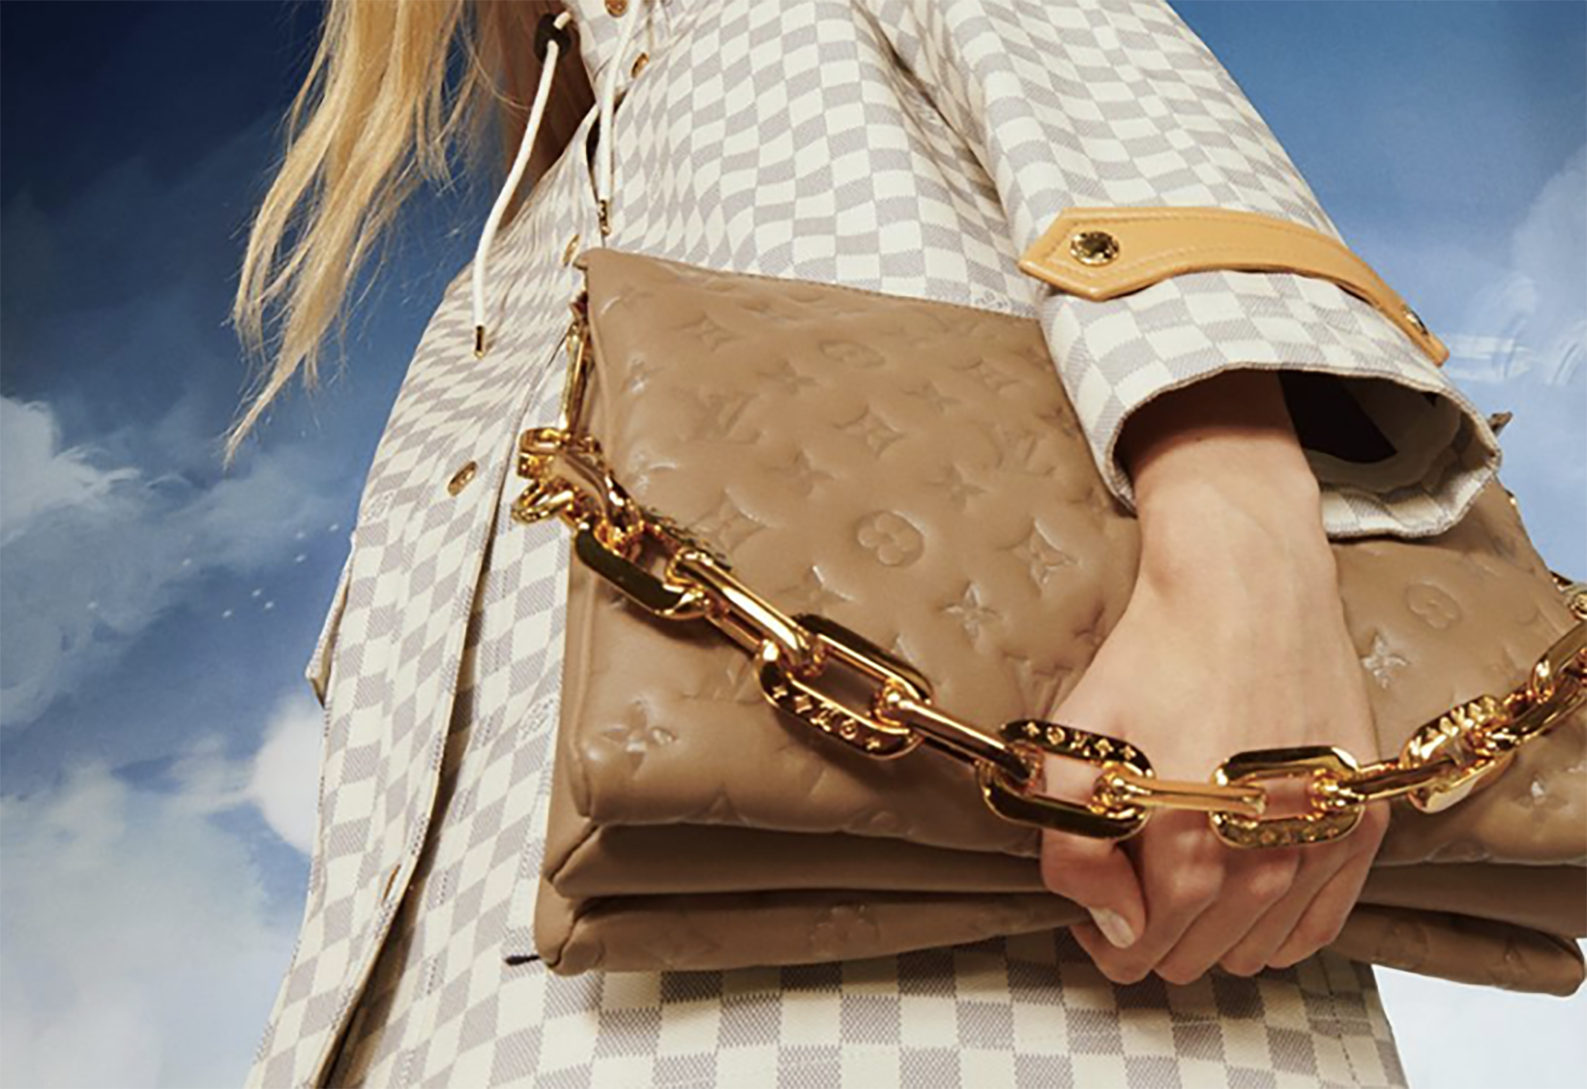 One of the most popular LV bags to own: The LV Twist Bag